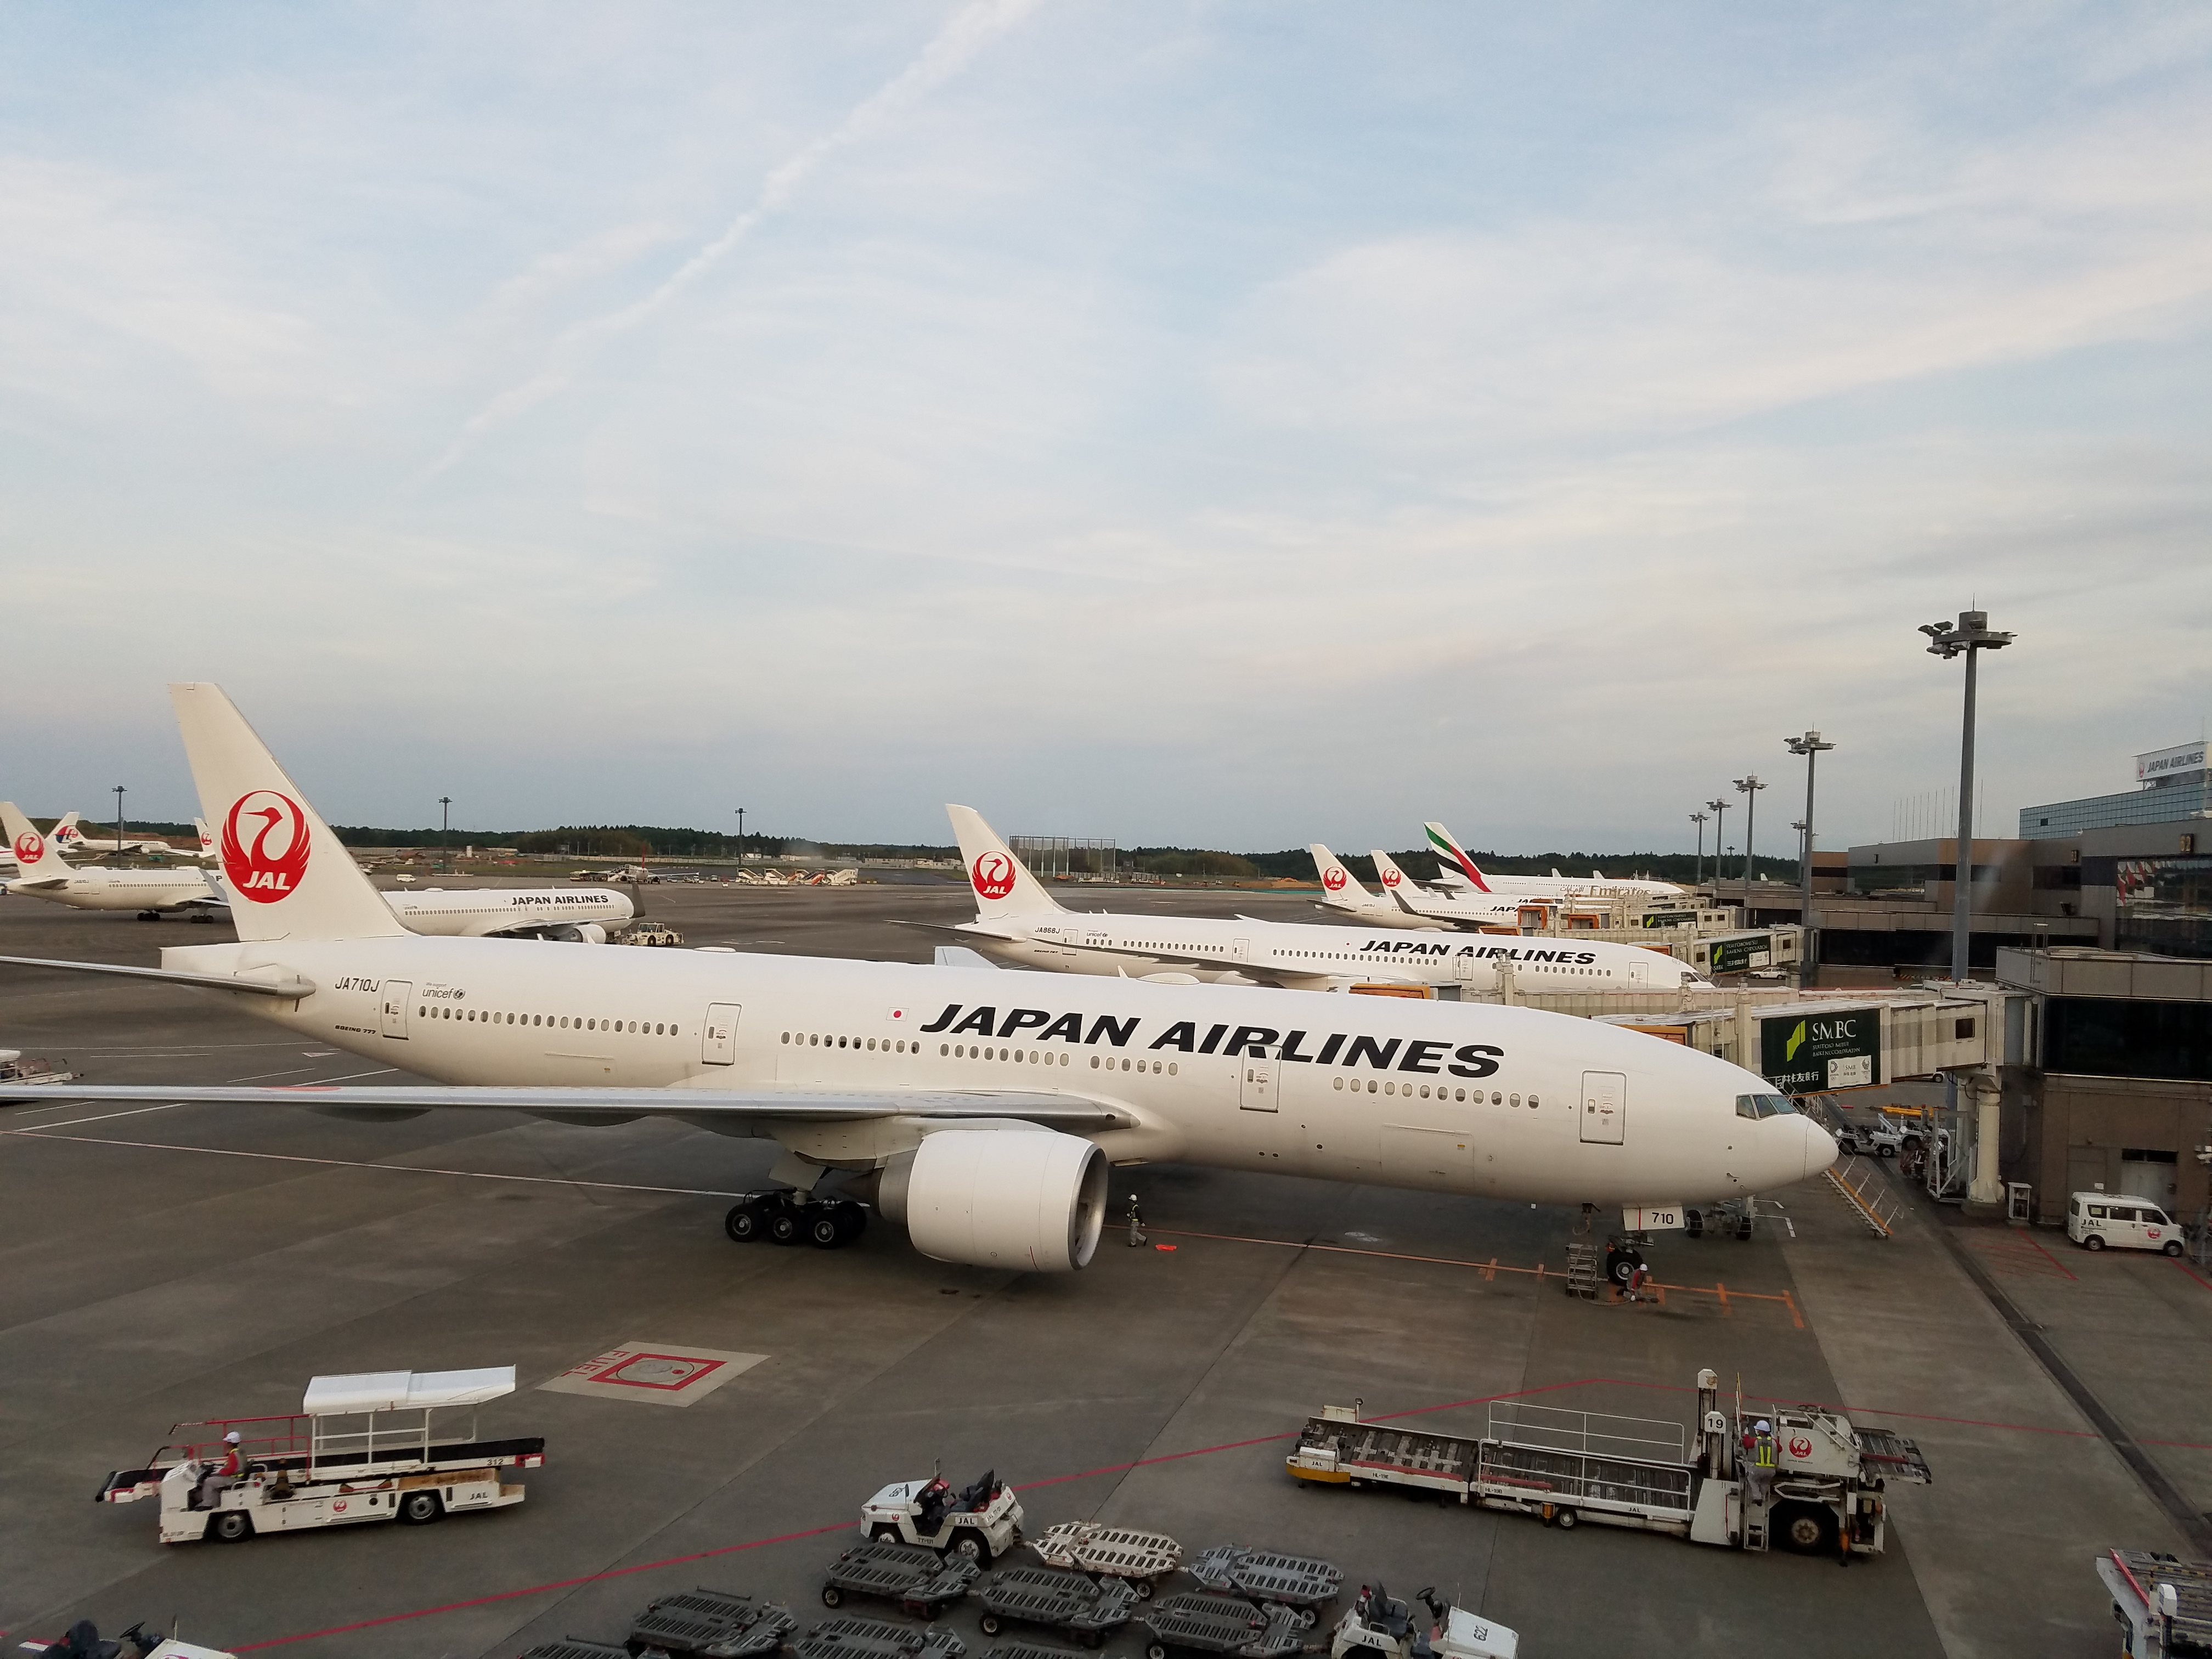 How Drunken Japan Airlines Pilot’s Big Night In Dallas Cancelled A Flight To Tokyo Last Week